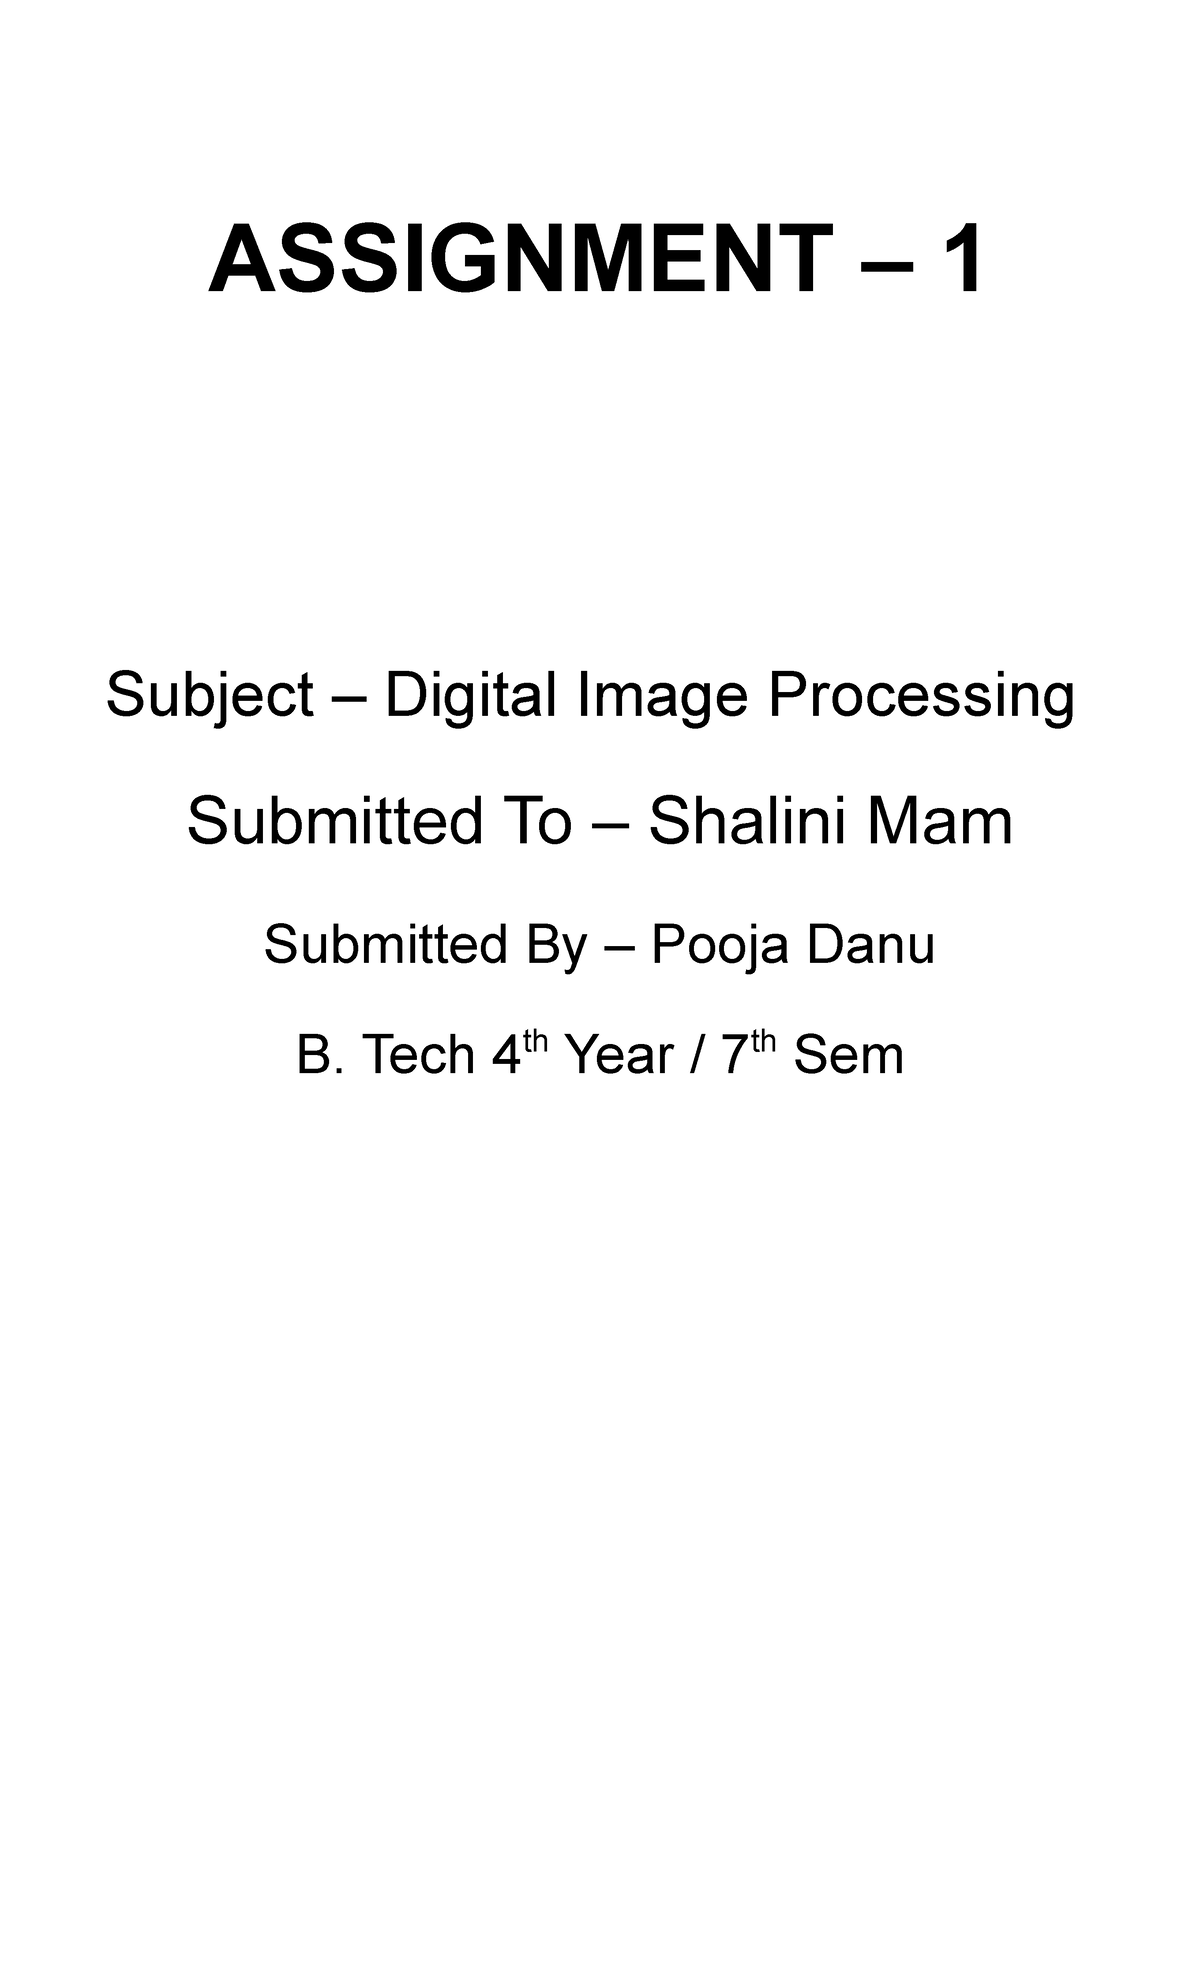 digital image processing assignment